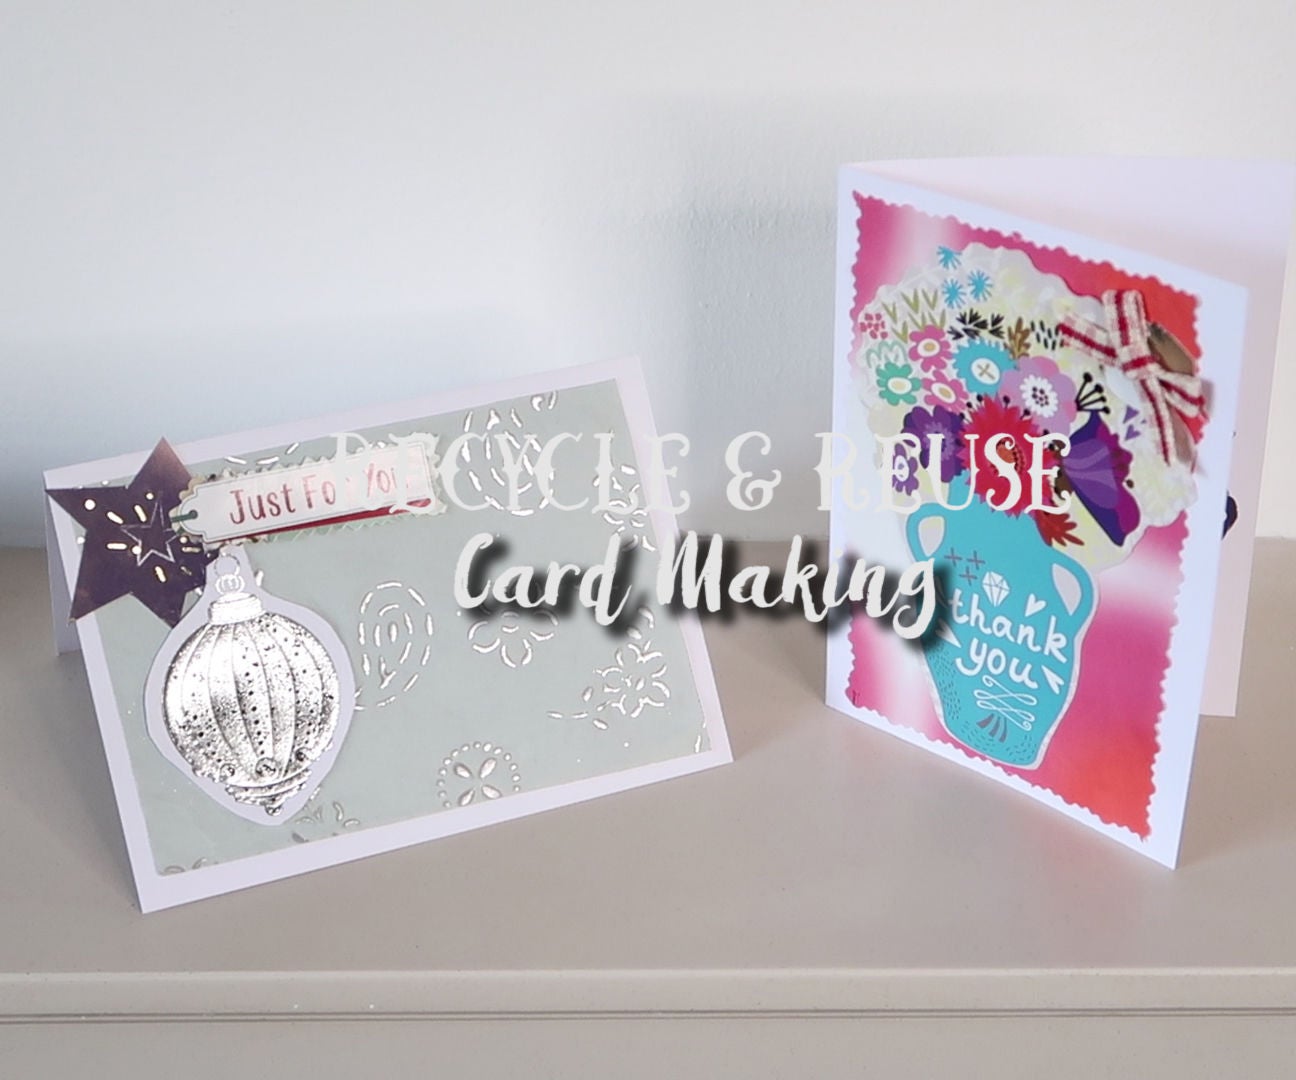 How to Create Cards by Recycling & Reusing Old Cards